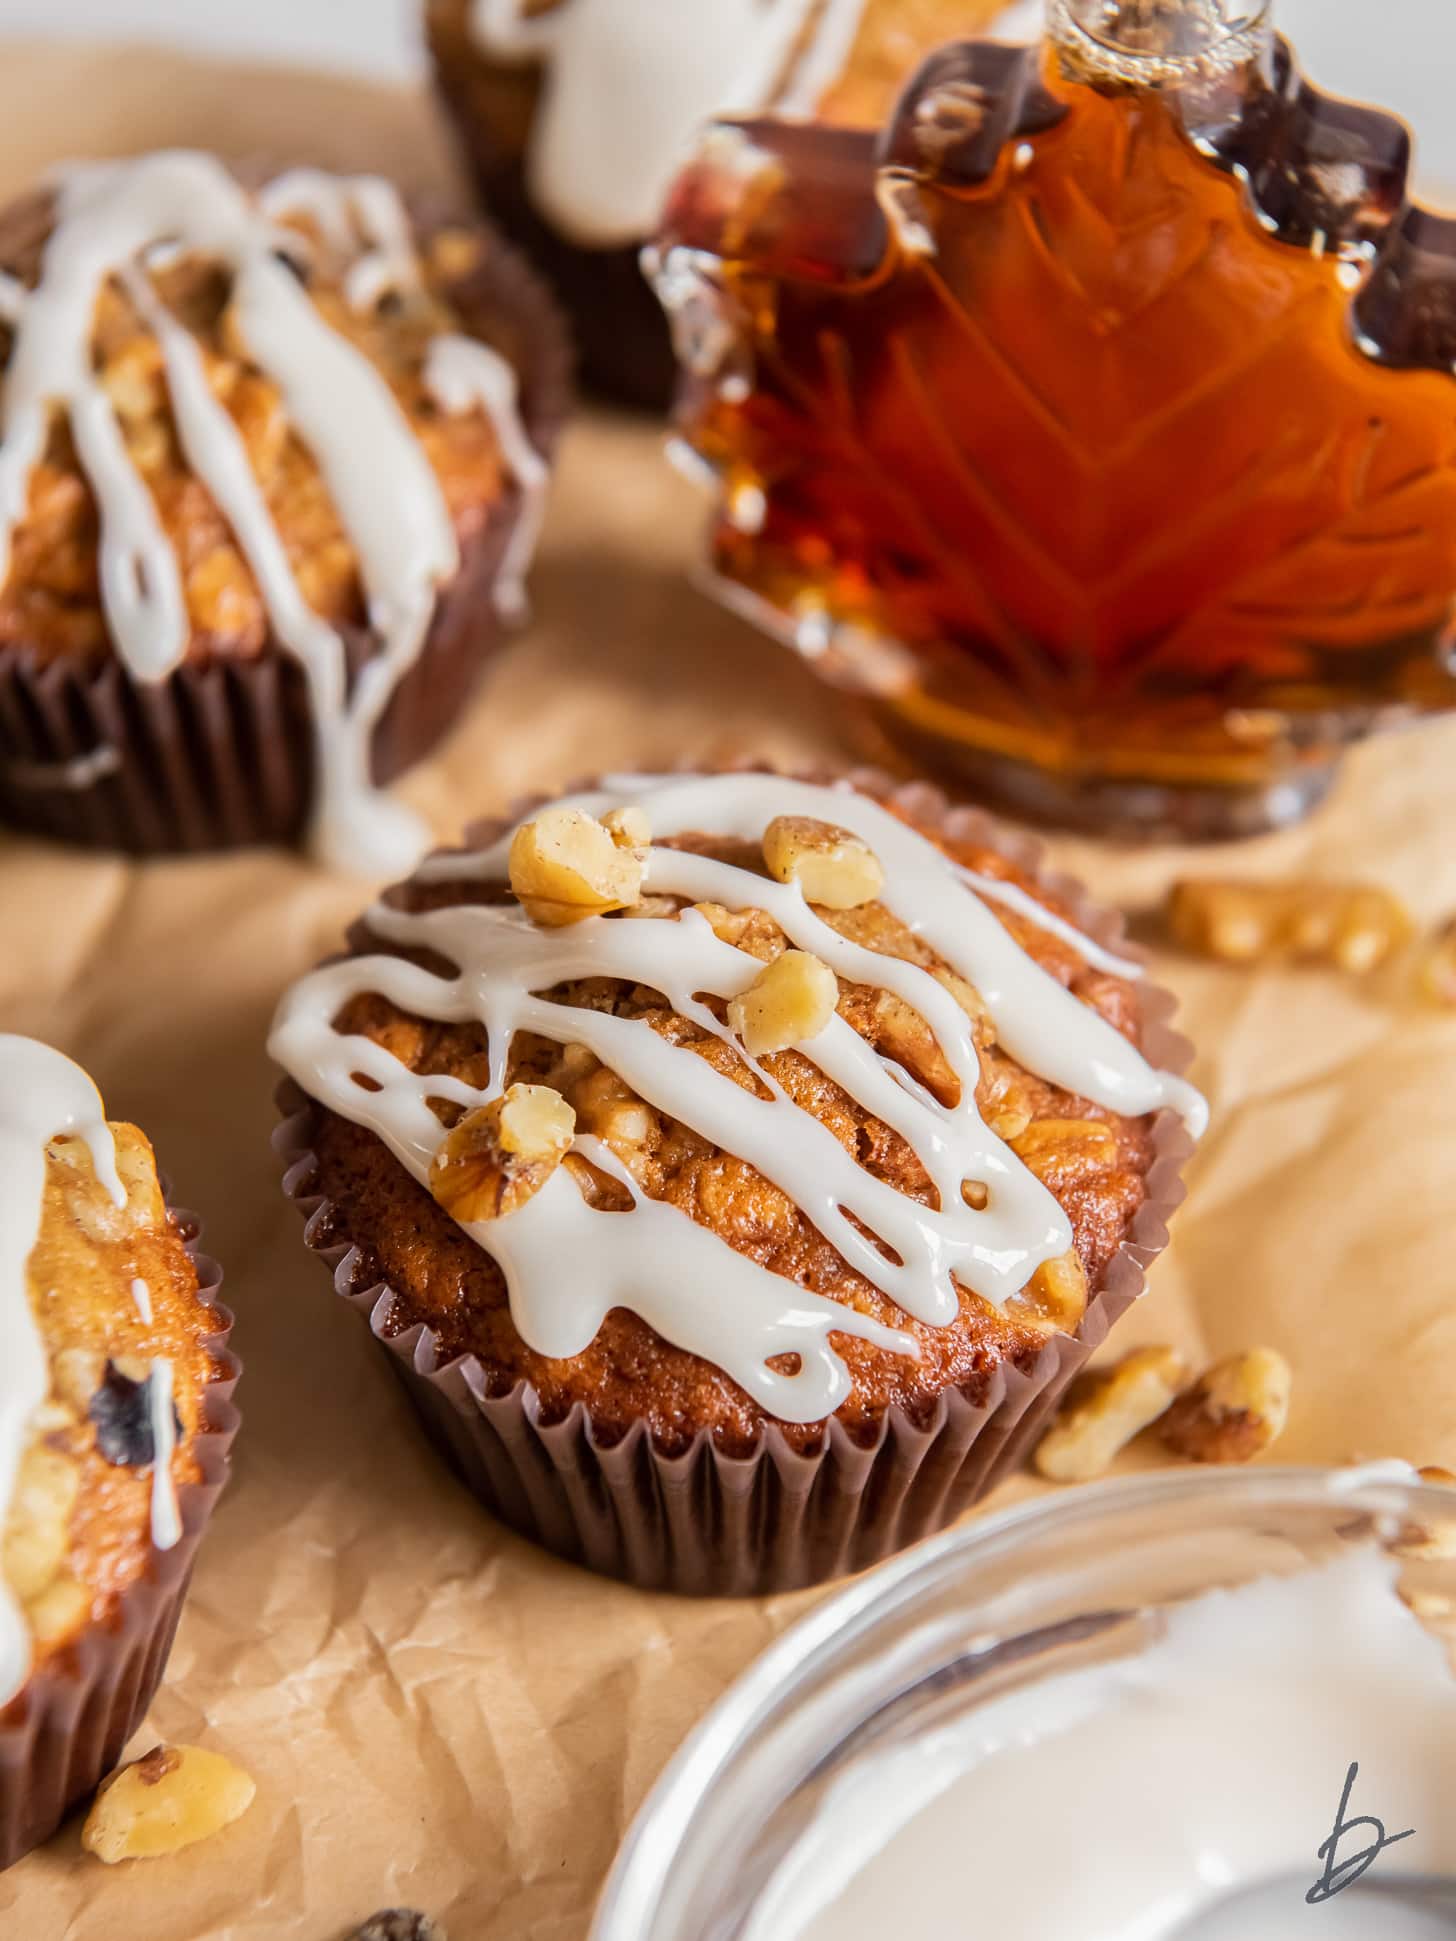 maple muffin with glaze drizzled on top with a few crushed walnuts.